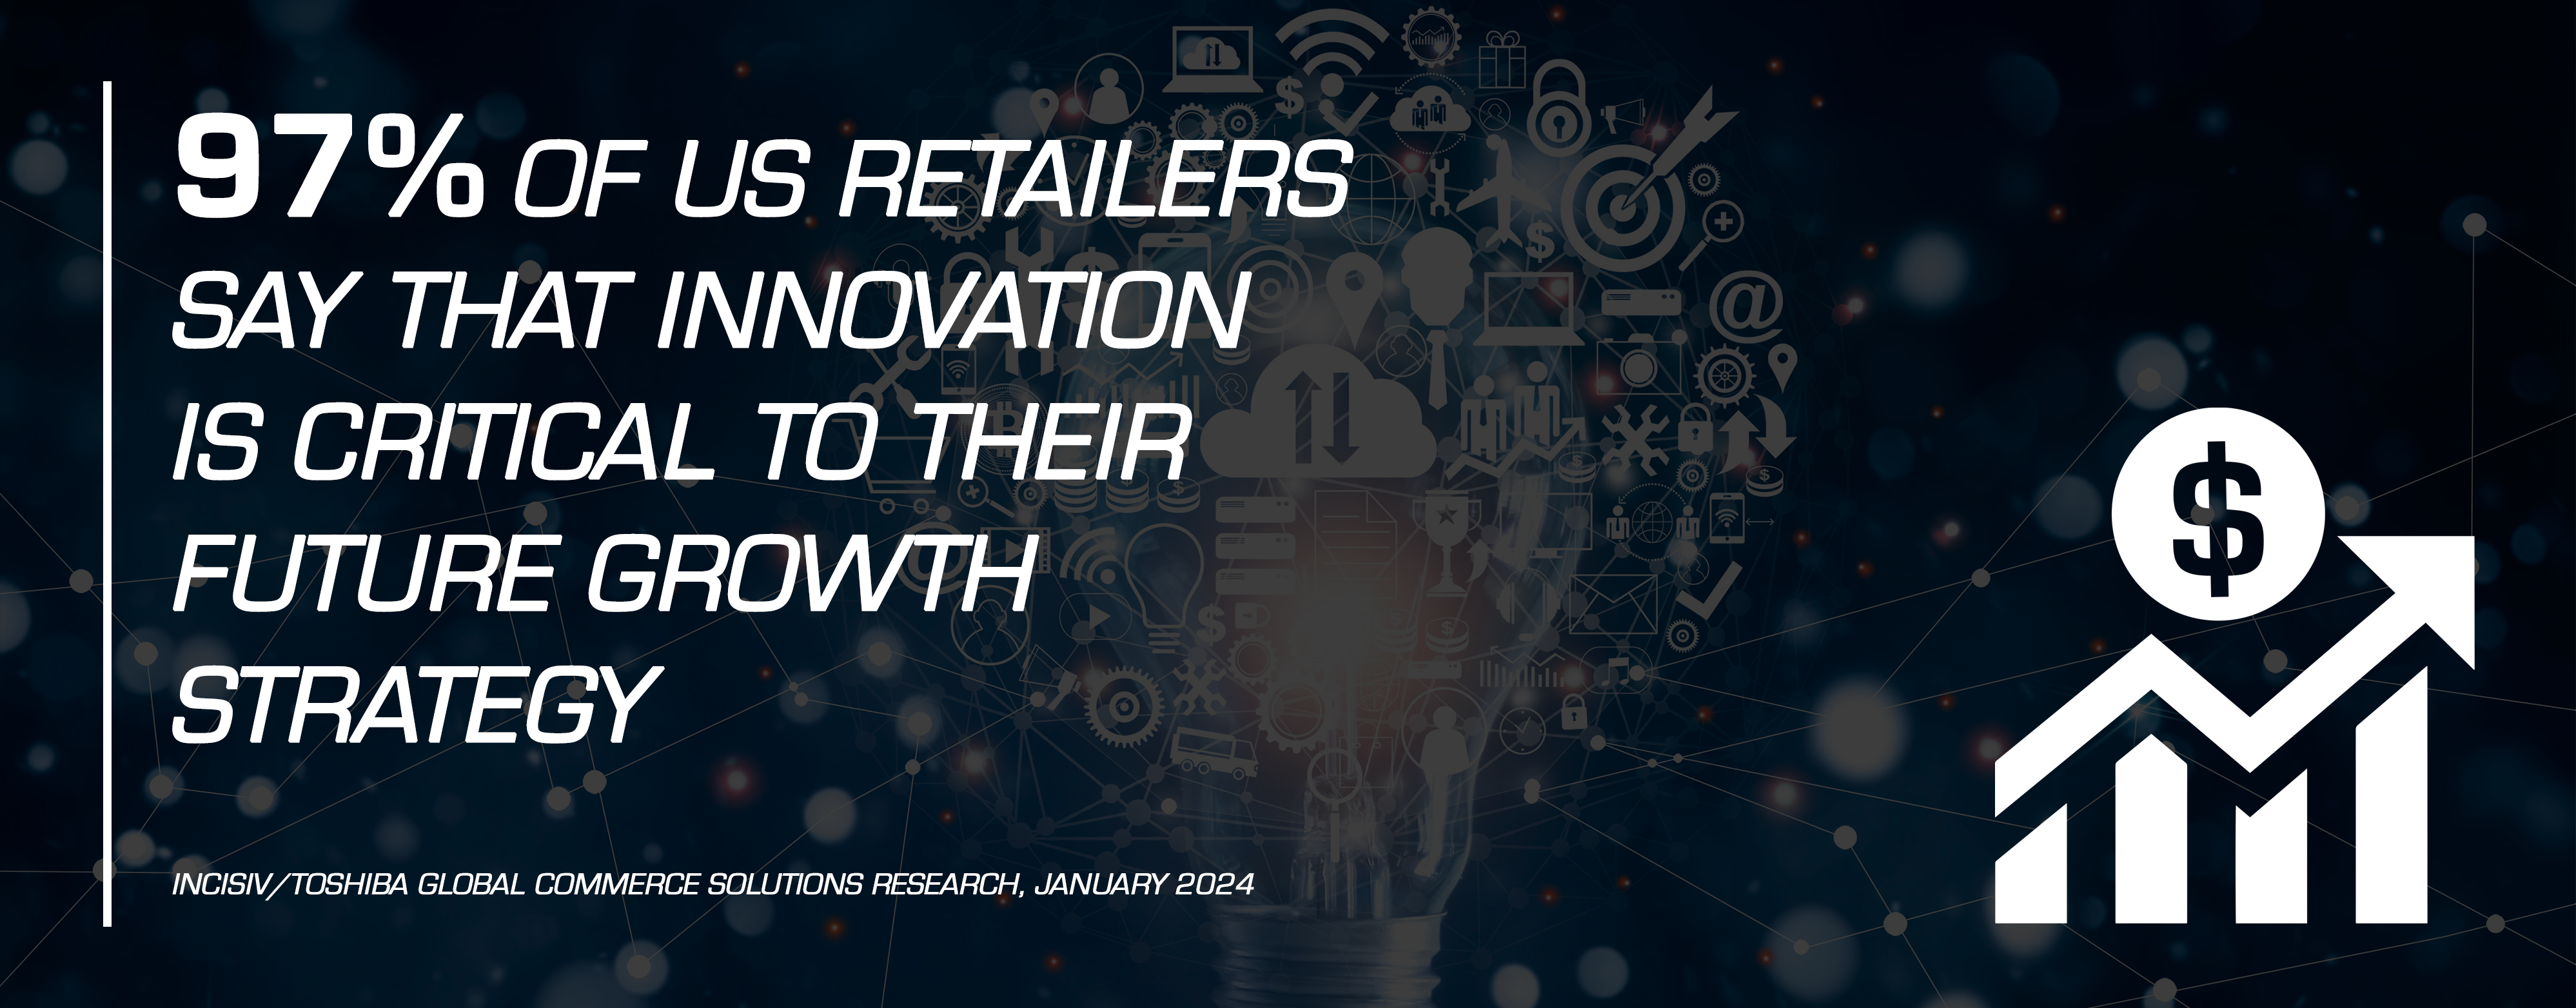 97% of retailers recognize innovation's pivotal role